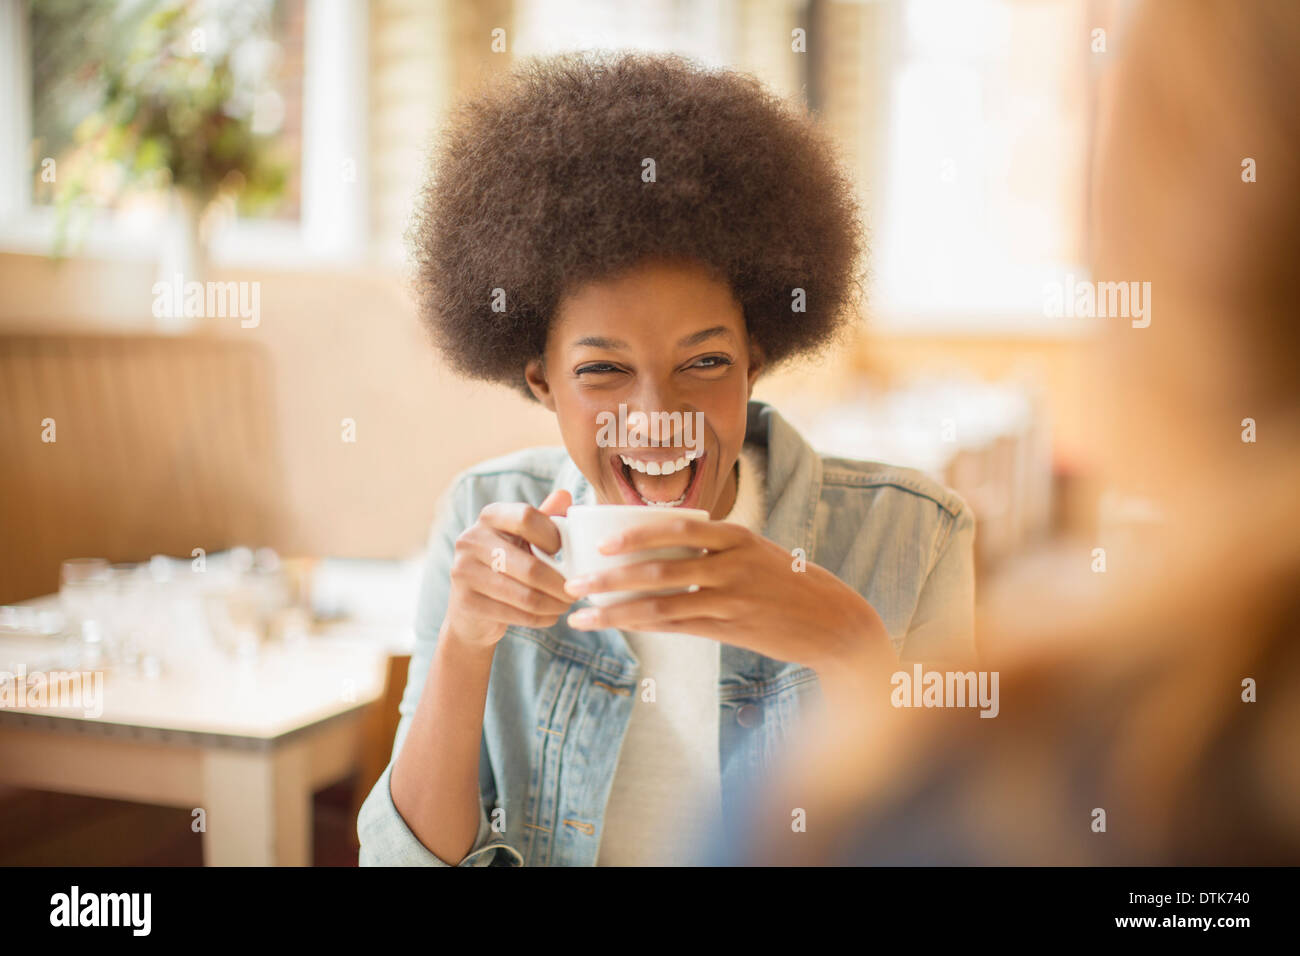 Women drinking coffee in cafe Stock Photo